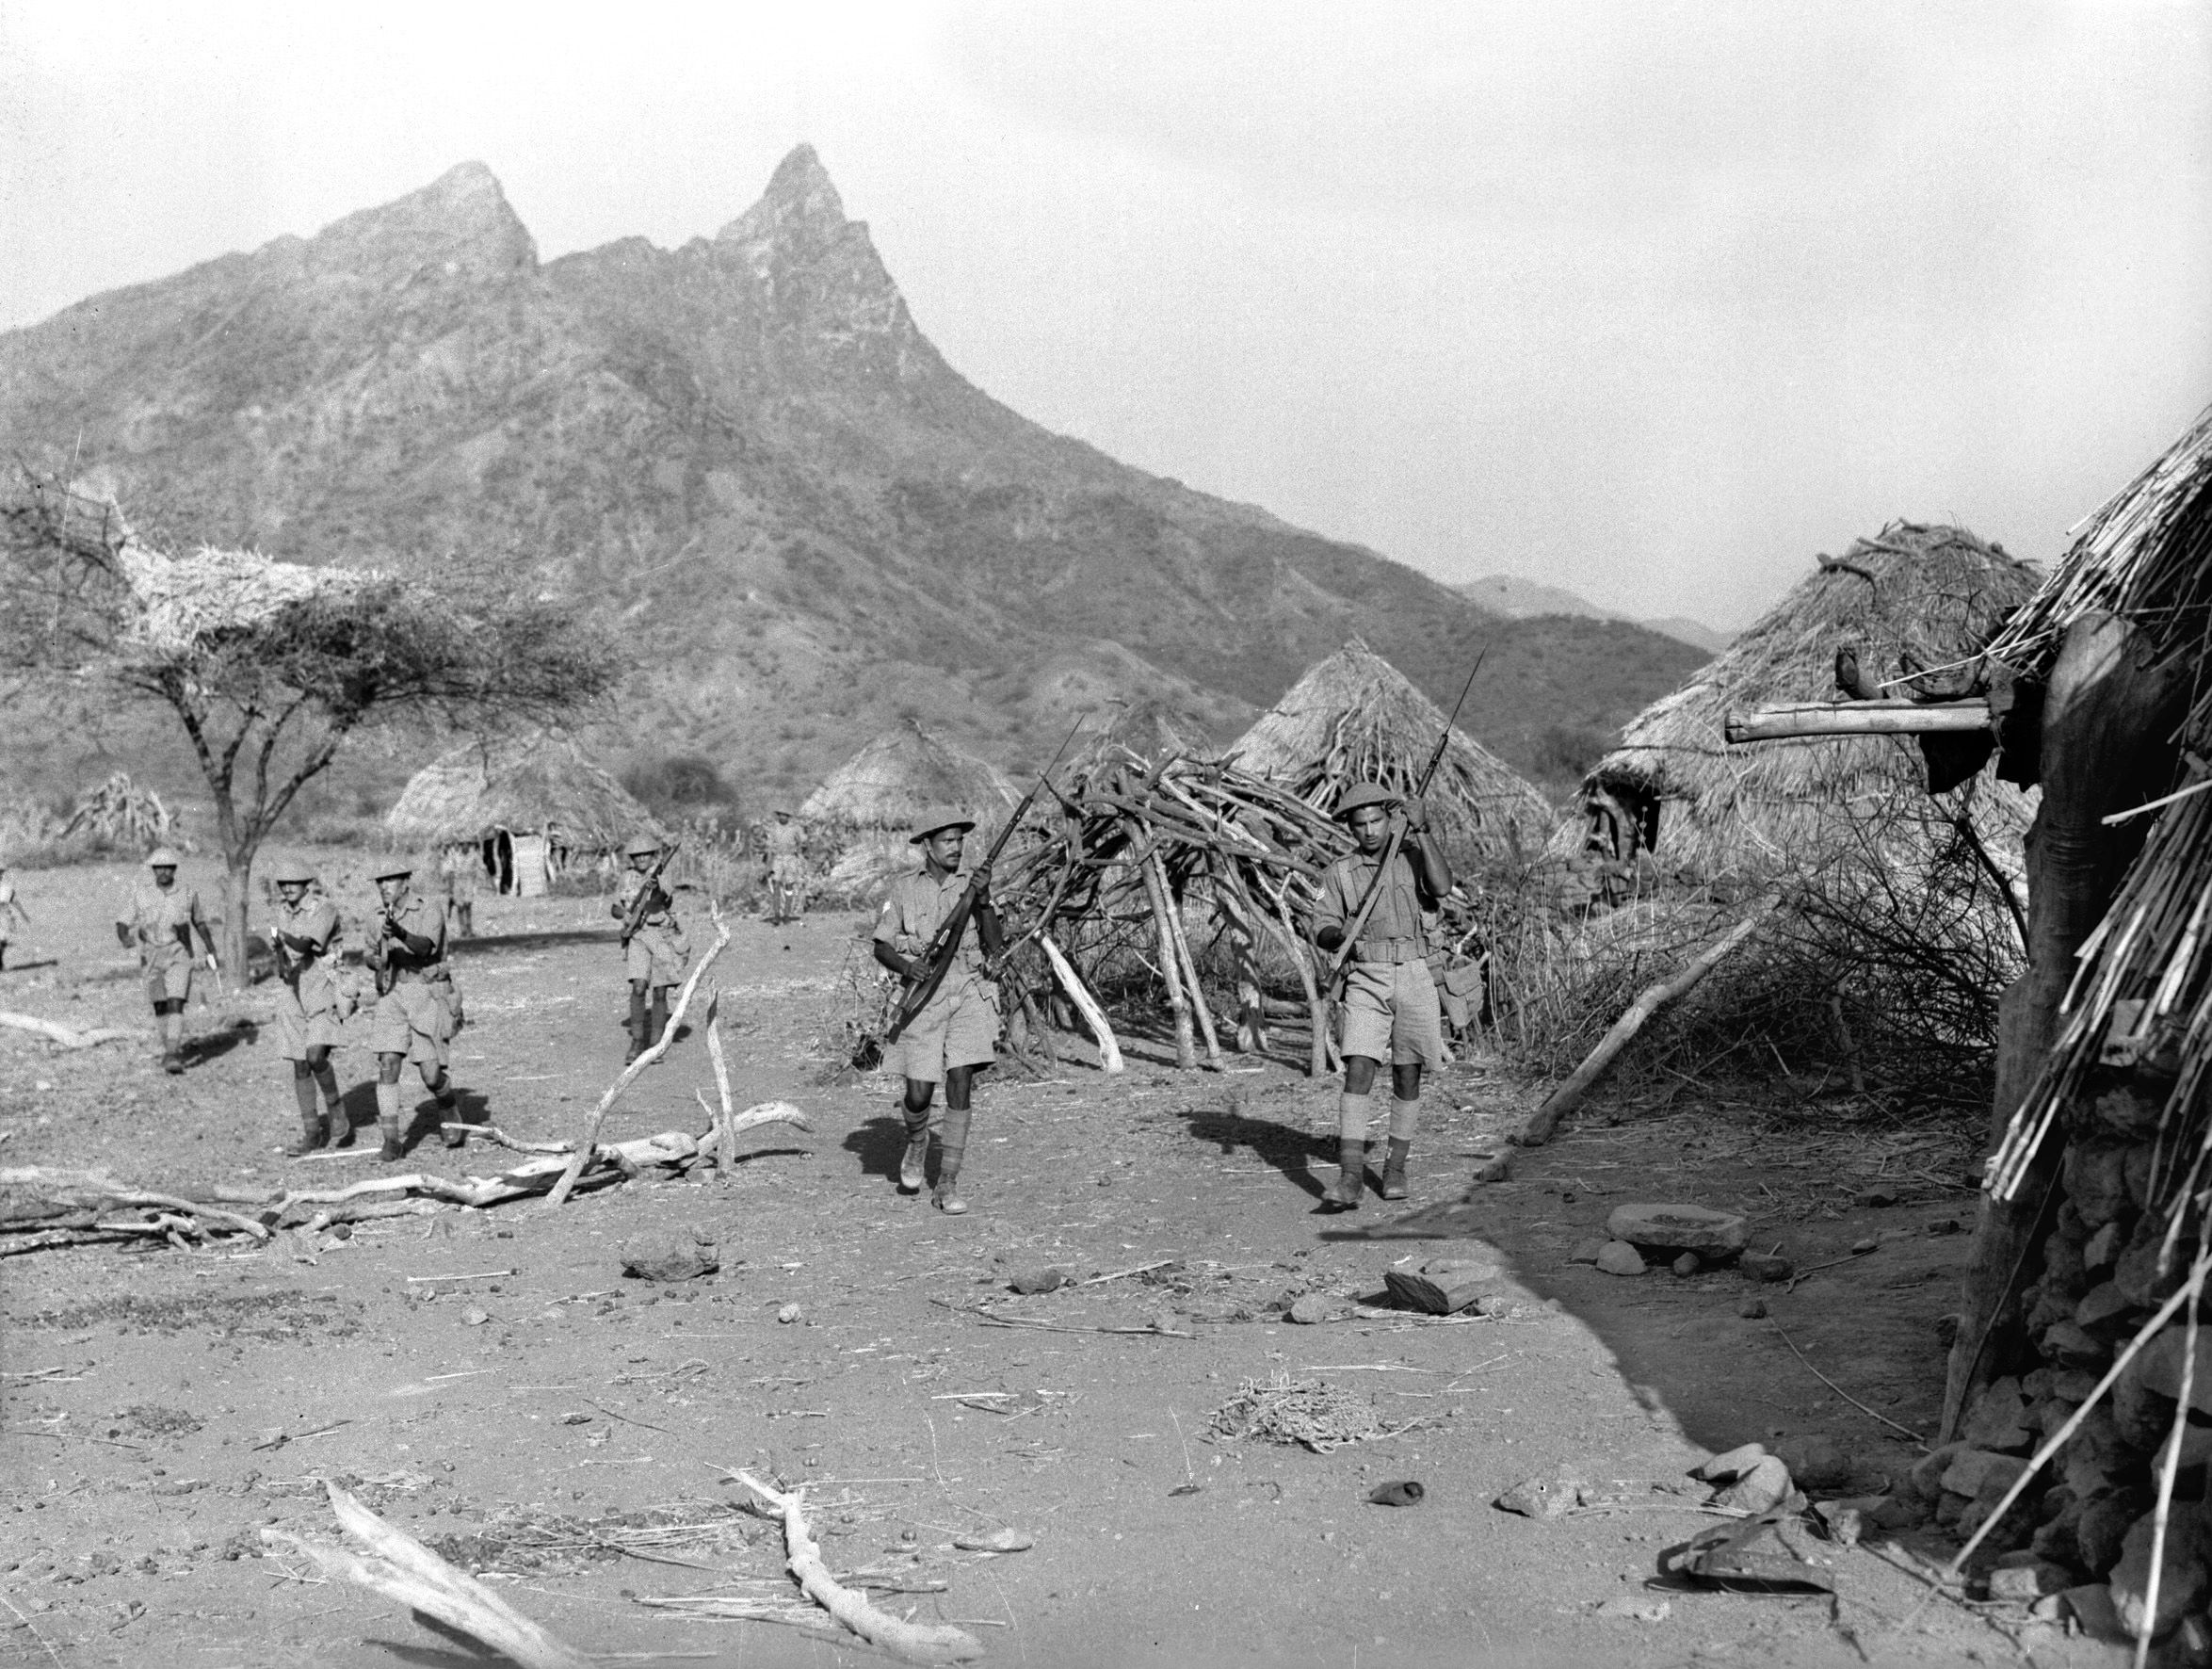 Ethiopian soldiers clear a native village in the Italian province of Eritrea in the spring of 1941. The Italians had invaded Ethiopia on October 3, 1935, and eventually overran the country, sending Haile Selassie into exile.